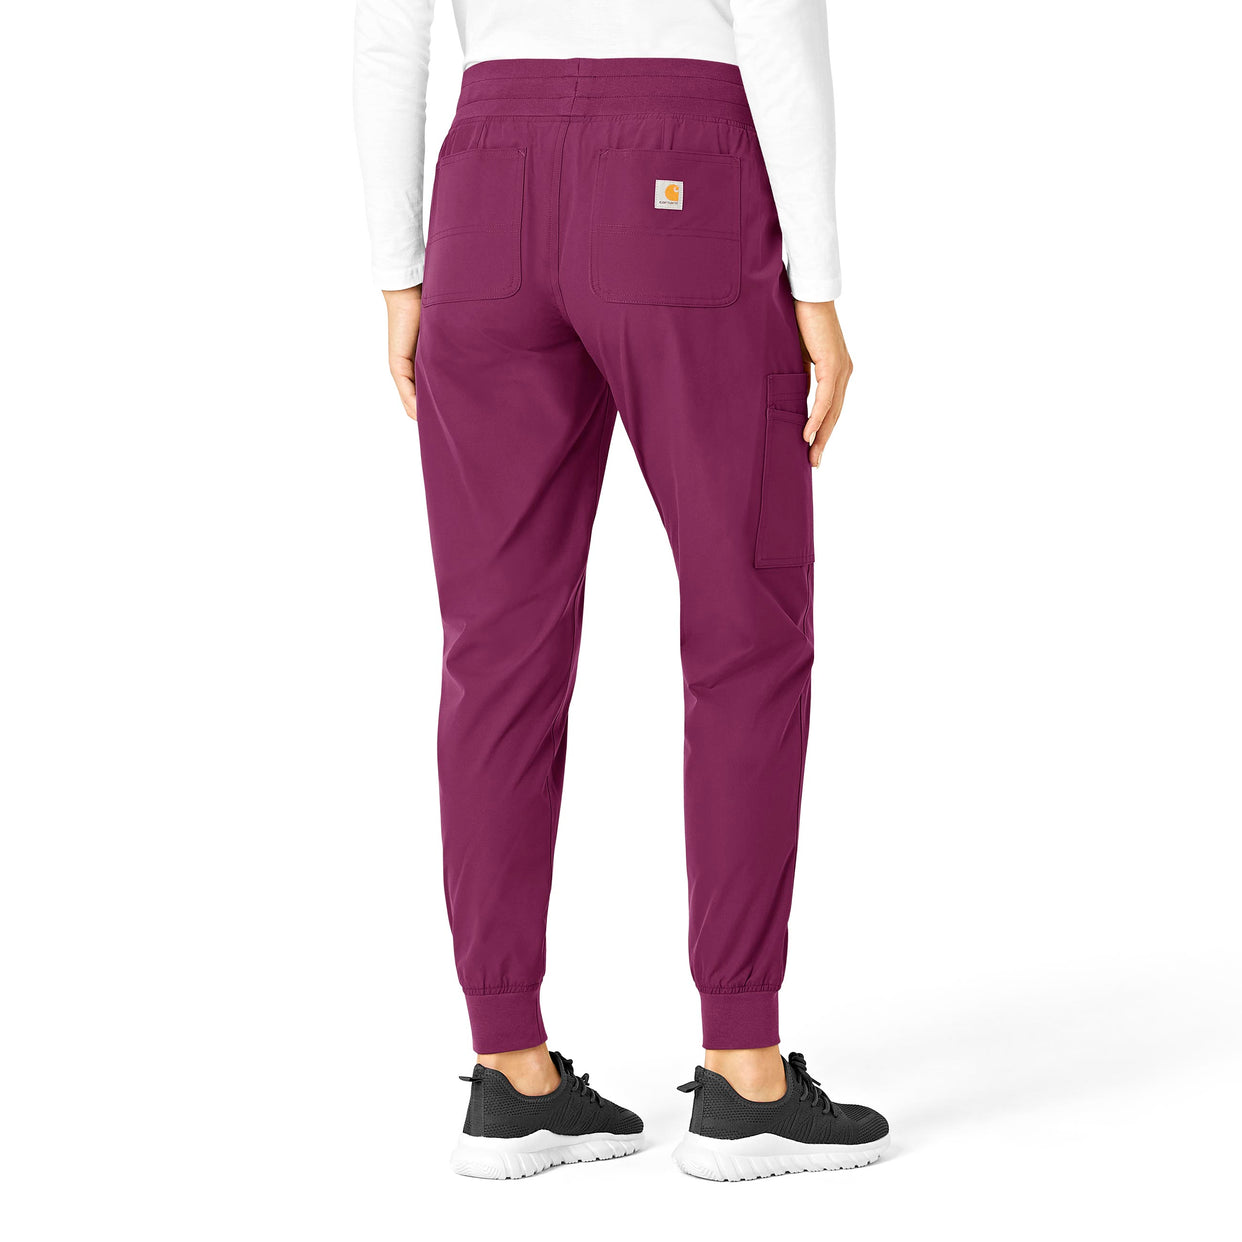 Force Essentials Women's Jogger Scrub Pant Wine back view